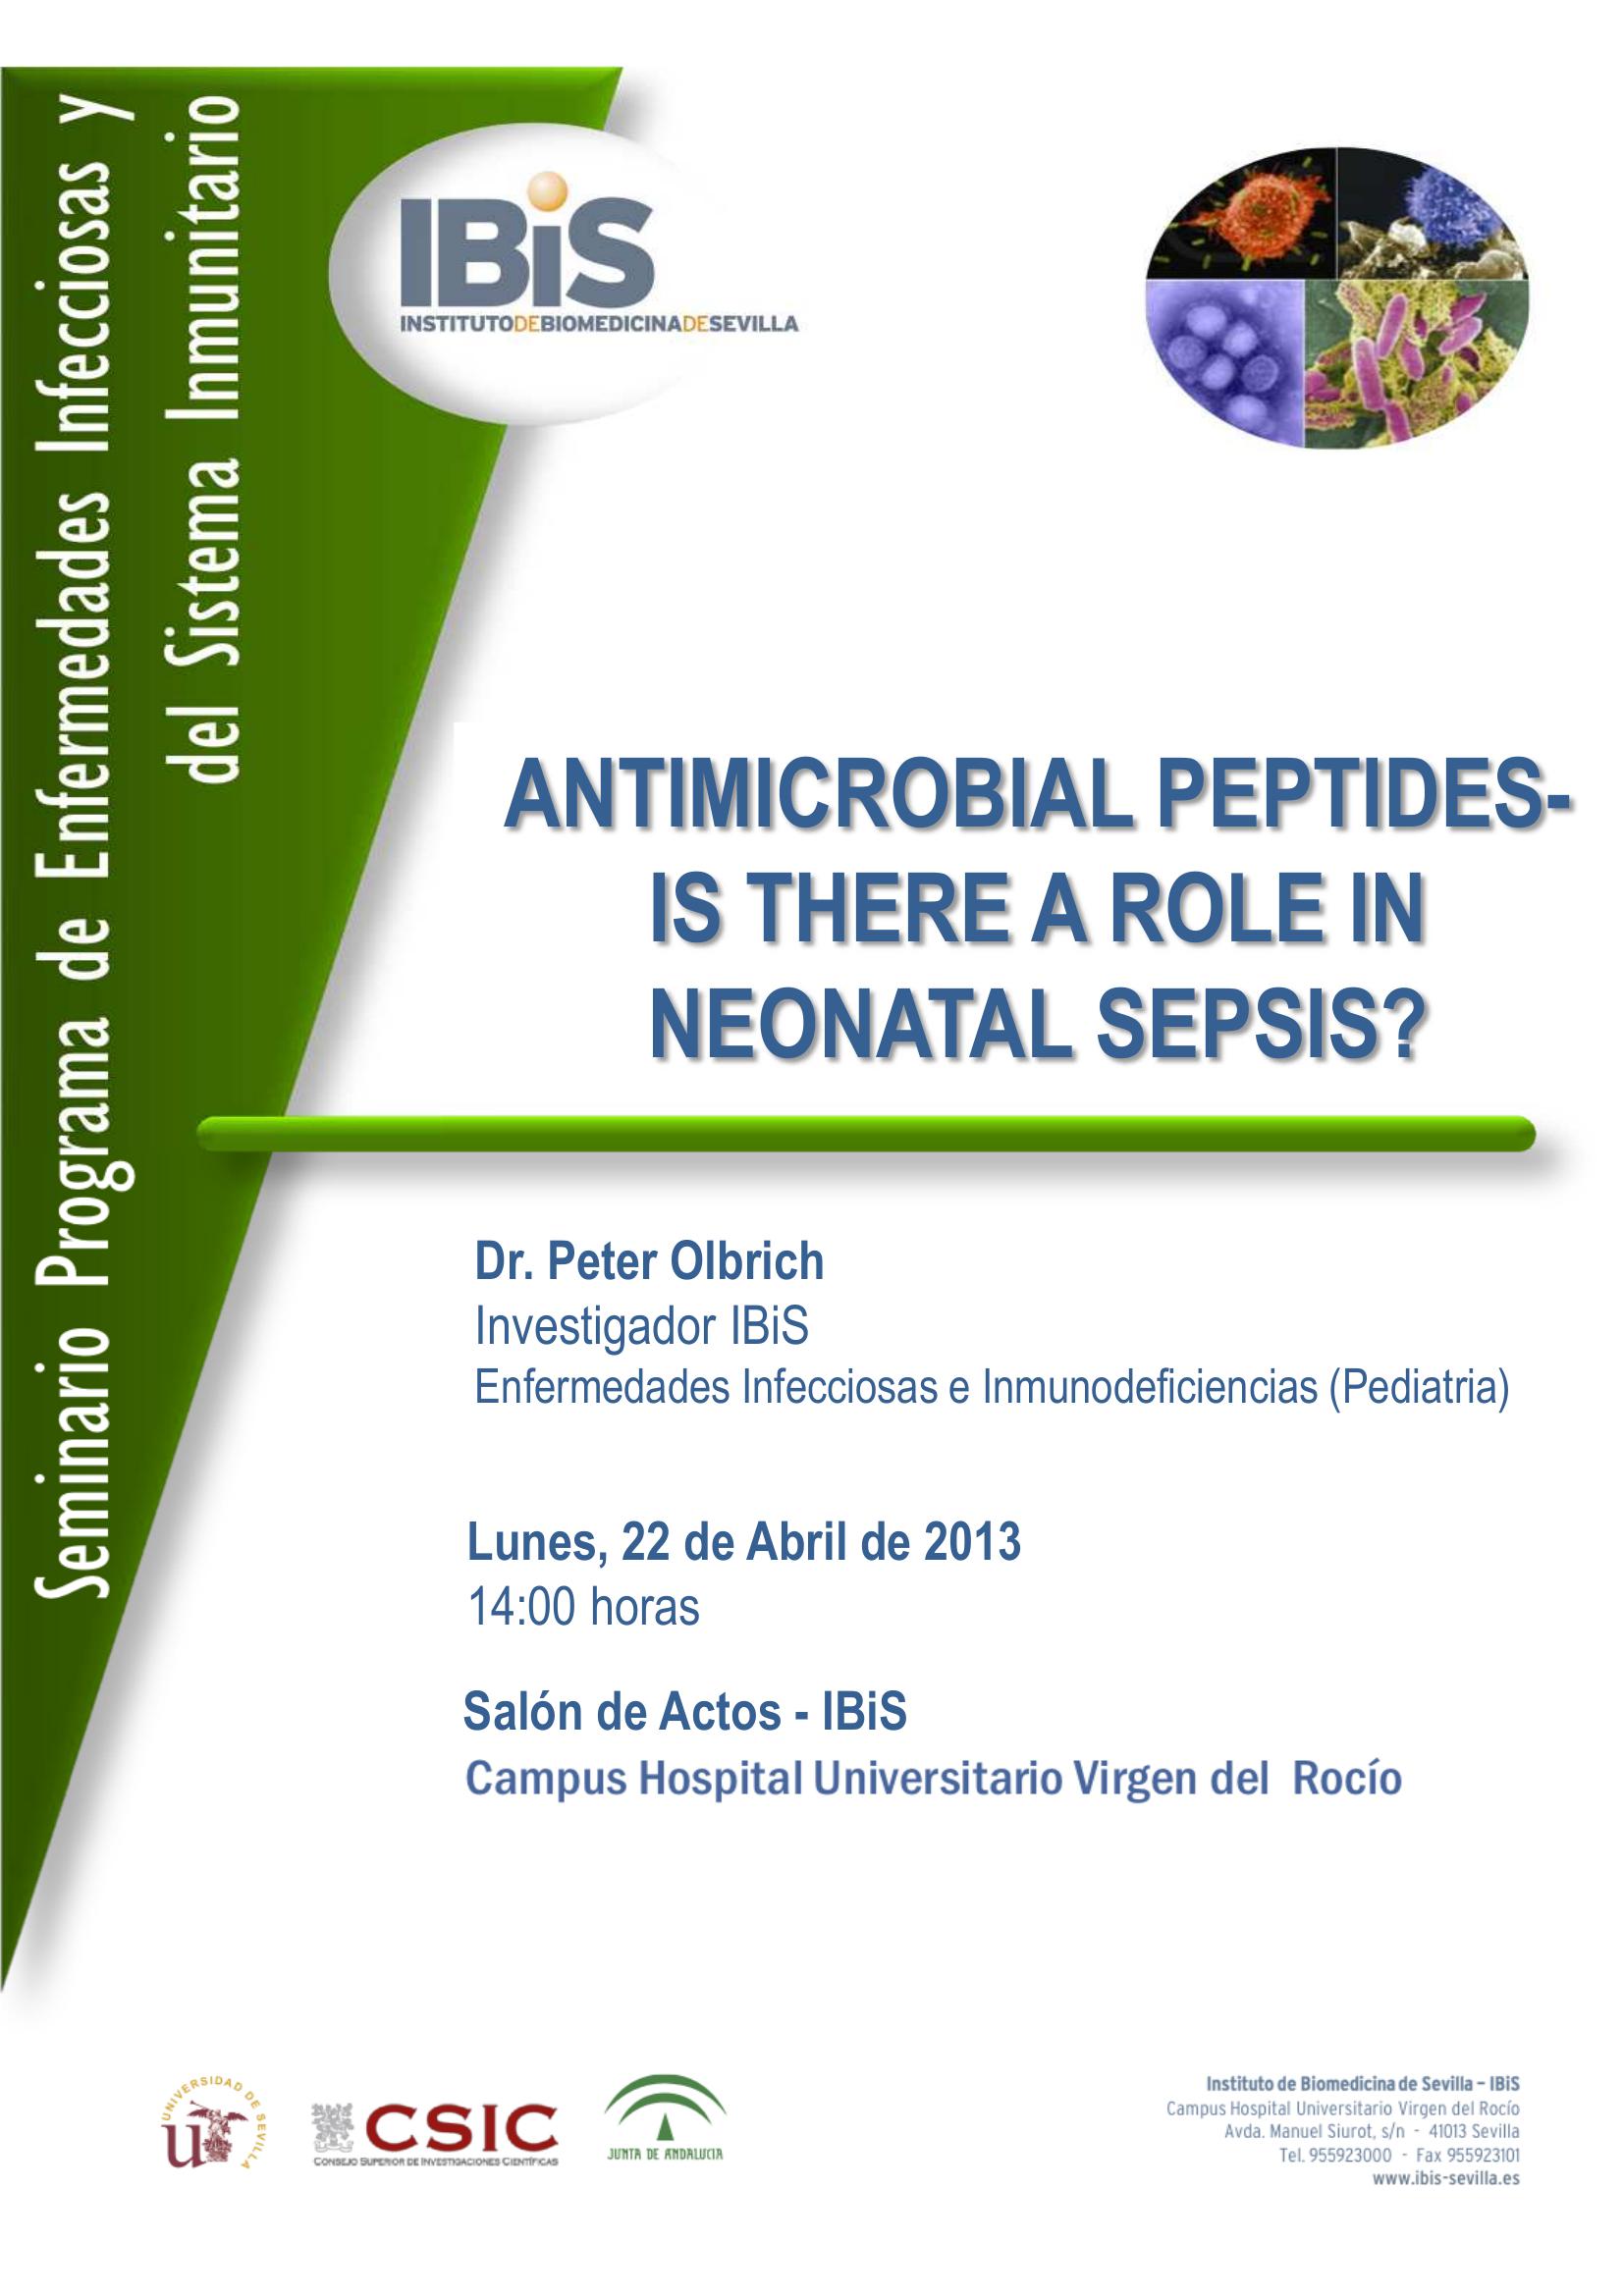 Poster: ANTIMICROBIAL PEPTIDESIS THERE A ROLE IN NEONATAL SEPSIS?